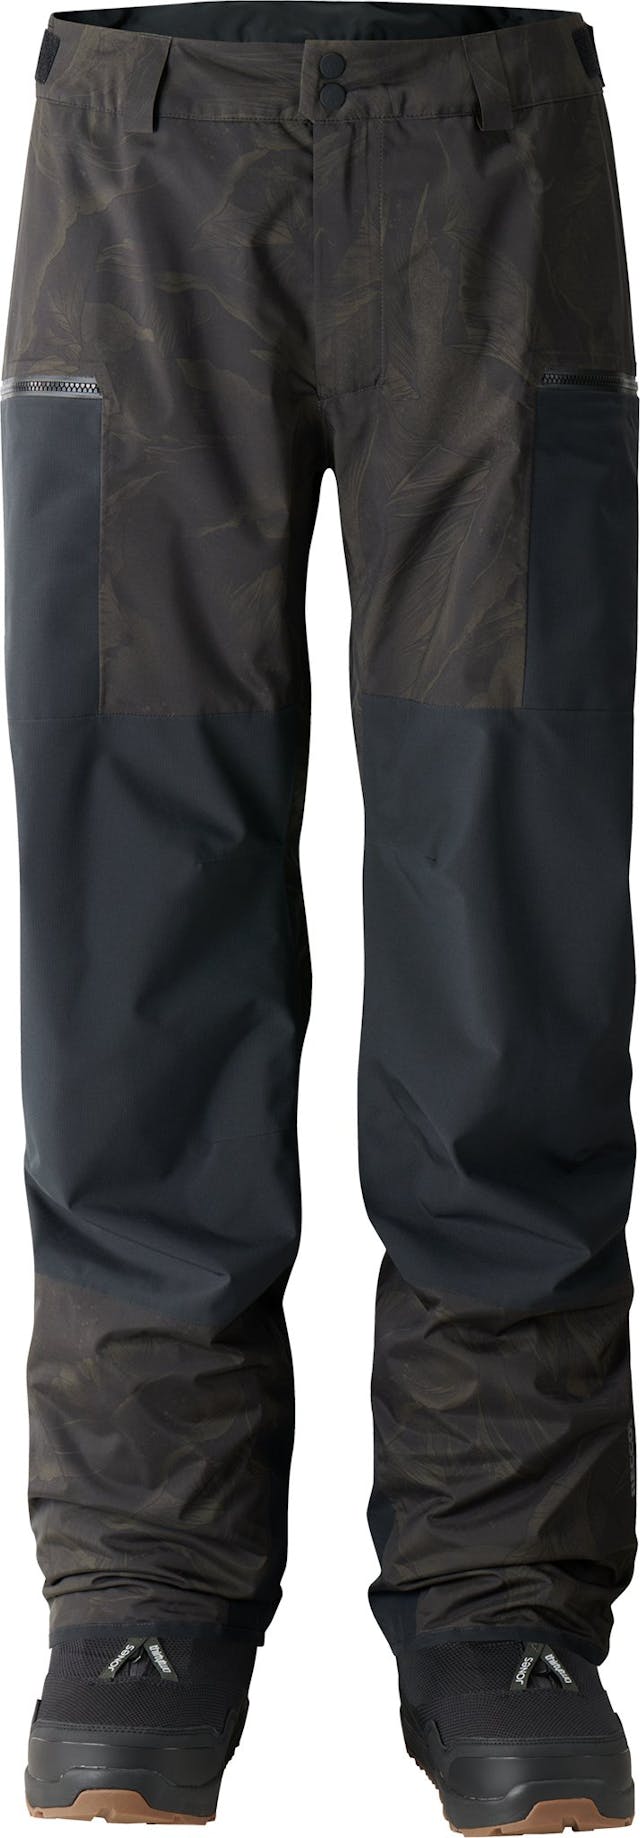 Product image for Mountain Surf Pants - Men's